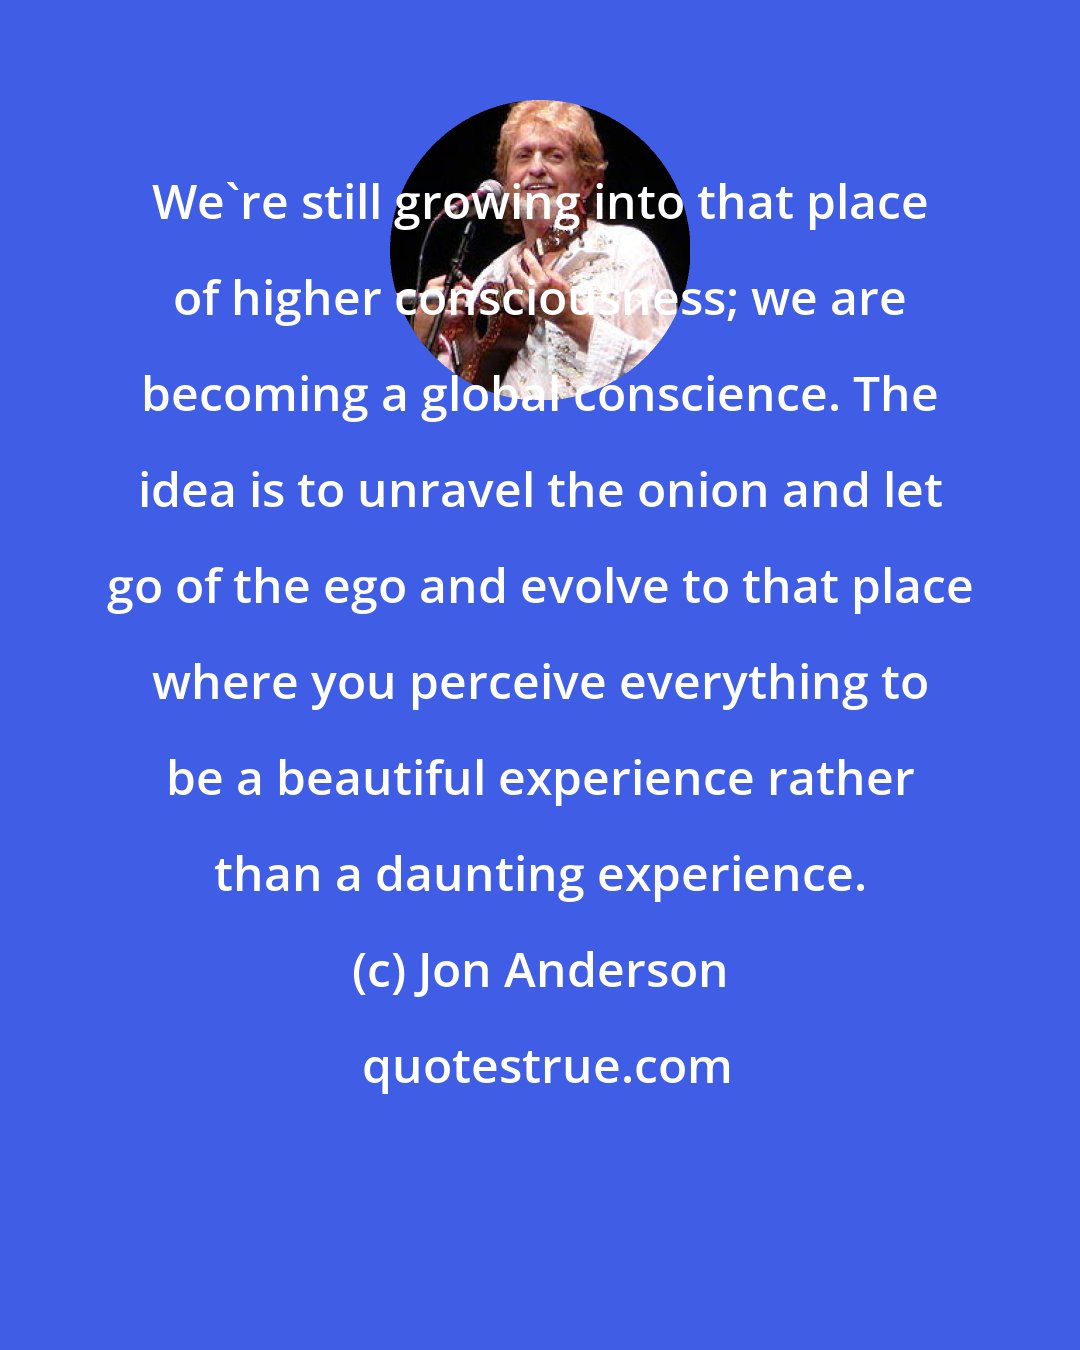 Jon Anderson: We're still growing into that place of higher consciousness; we are becoming a global conscience. The idea is to unravel the onion and let go of the ego and evolve to that place where you perceive everything to be a beautiful experience rather than a daunting experience.